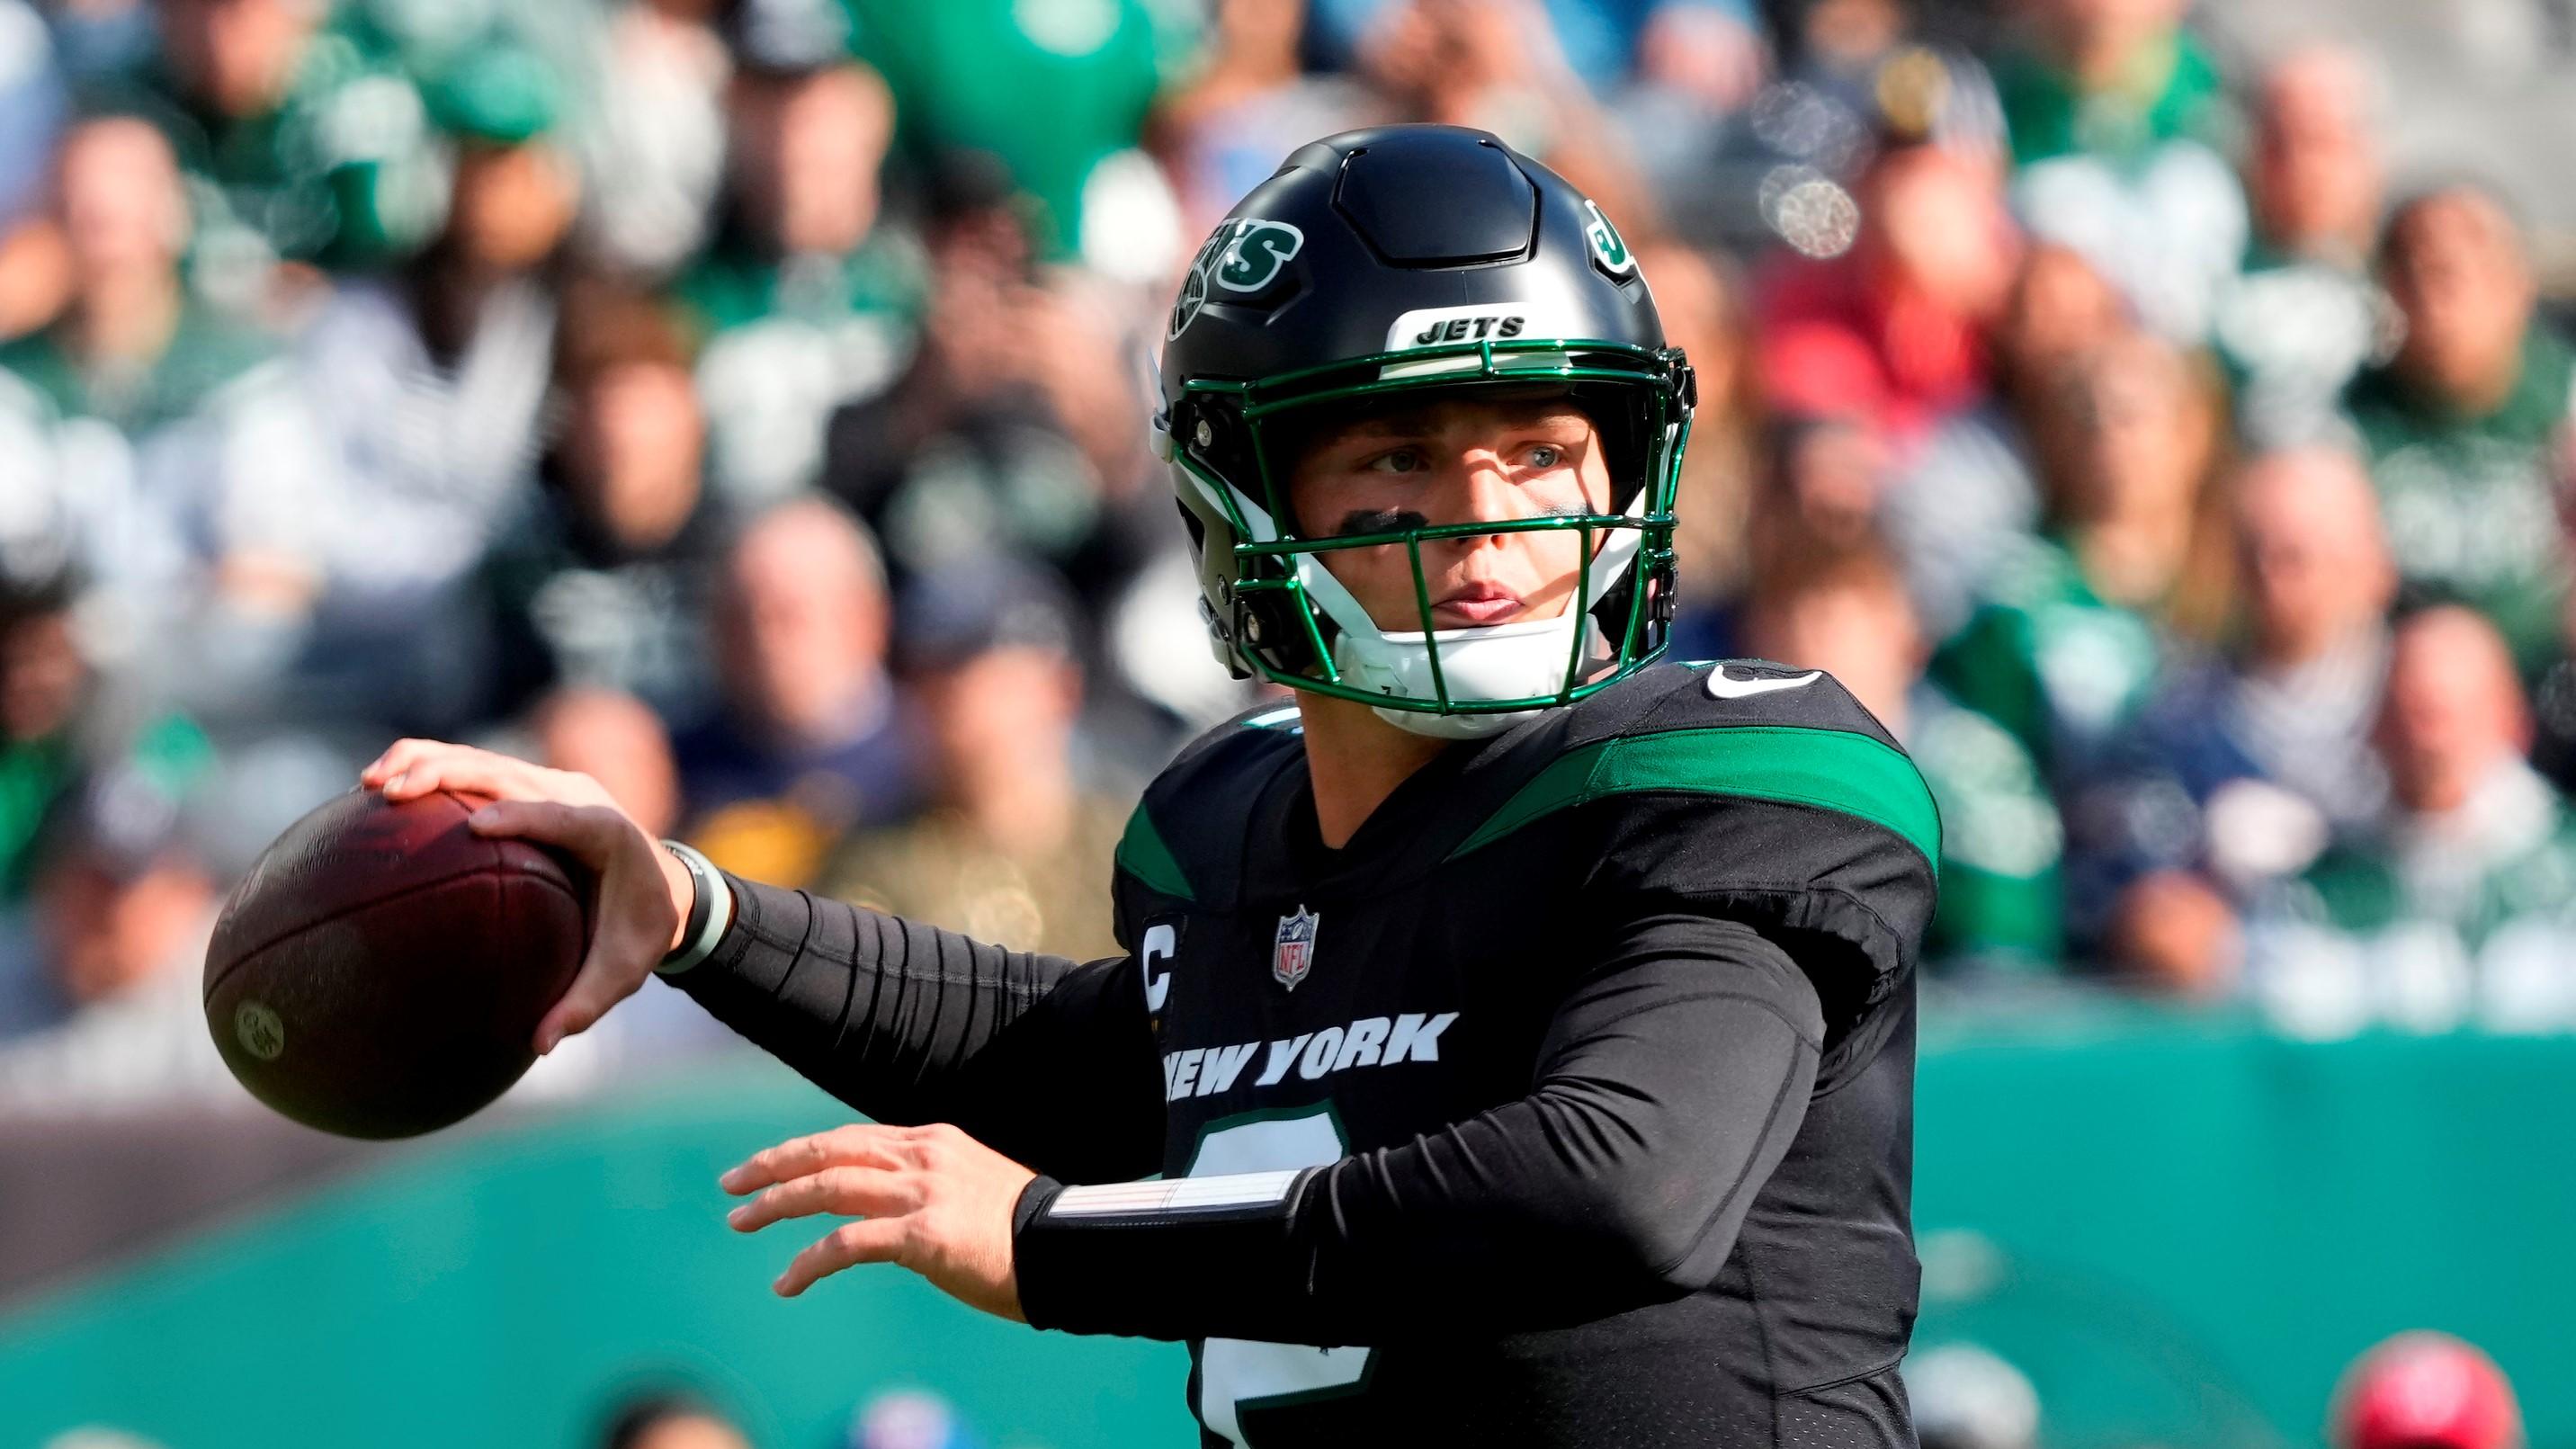 Oct 30, 2022; East Rutherford,NJ, USA; New York Jets quarterback Zach Wilson (2) throws against the New England Patriots in the first quarter at MetLife Stadium. Mandatory Credit: Robert Deutsch-USA TODAY Sports / © Robert Deutsch-USA TODAY Sports